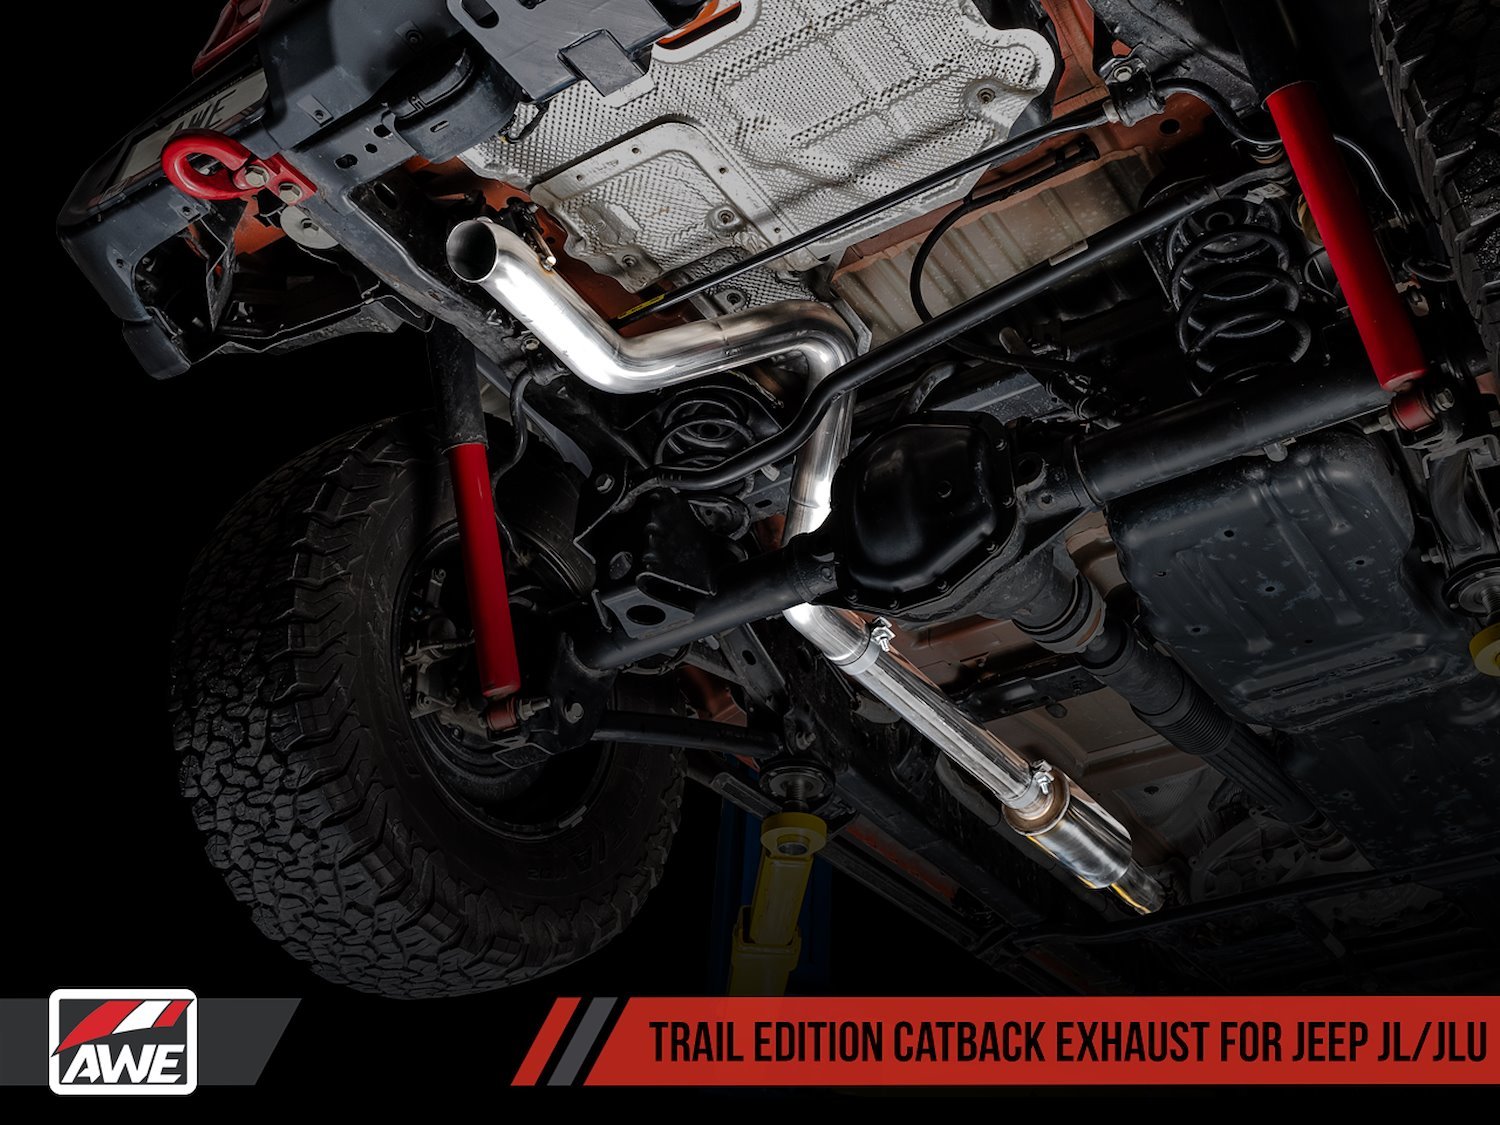 Trail Edition Cat-back Exhaust for Jeep JL/JLU 2.0T